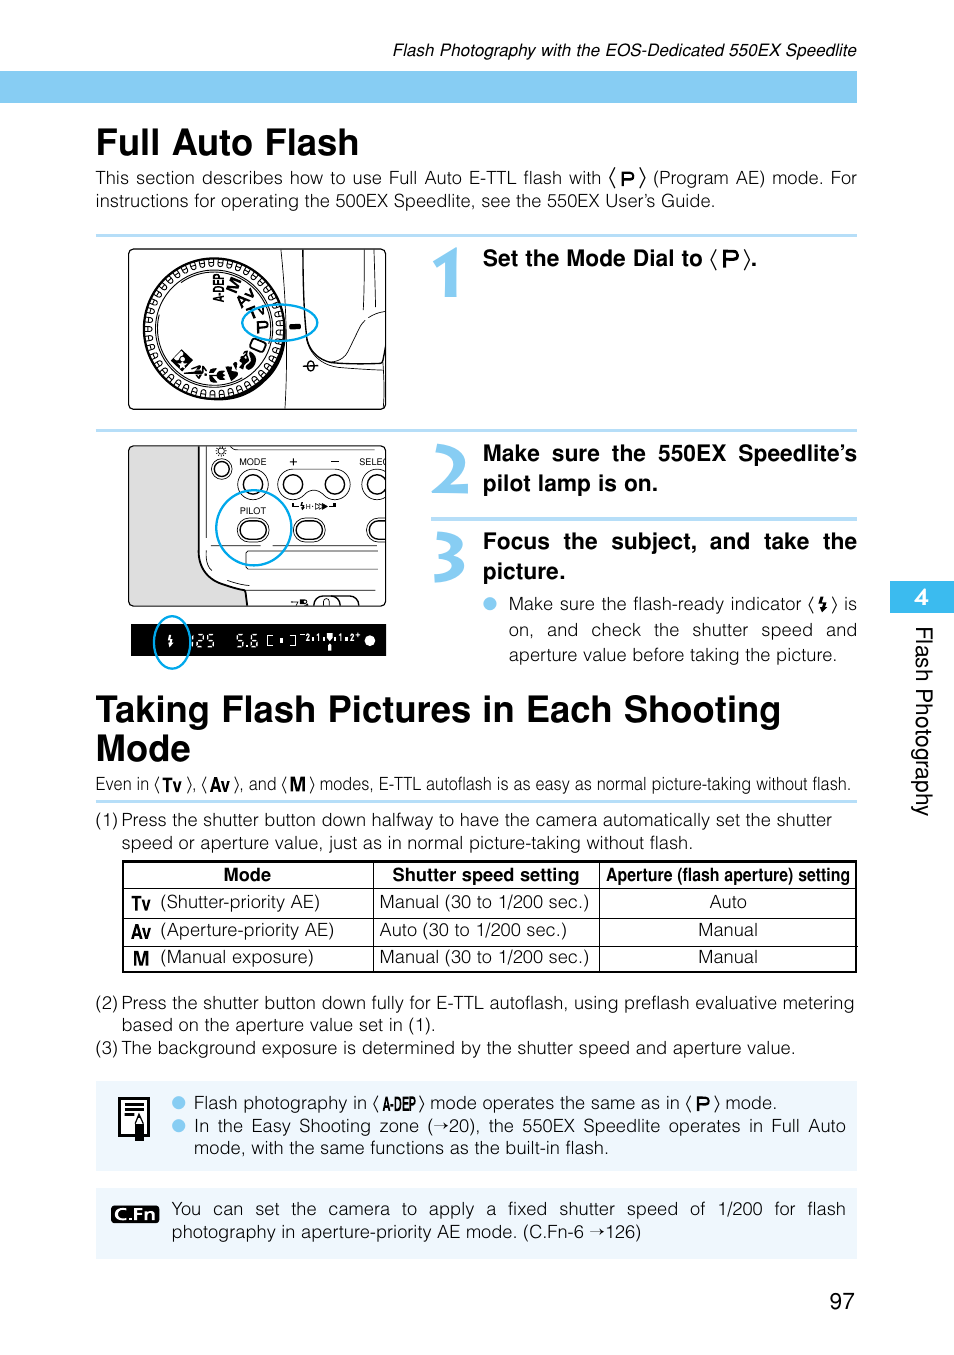 Full auto flash, Taking flash pictures in each shooting mode | Canon EOS D30 User Manual | Page 97 / 152